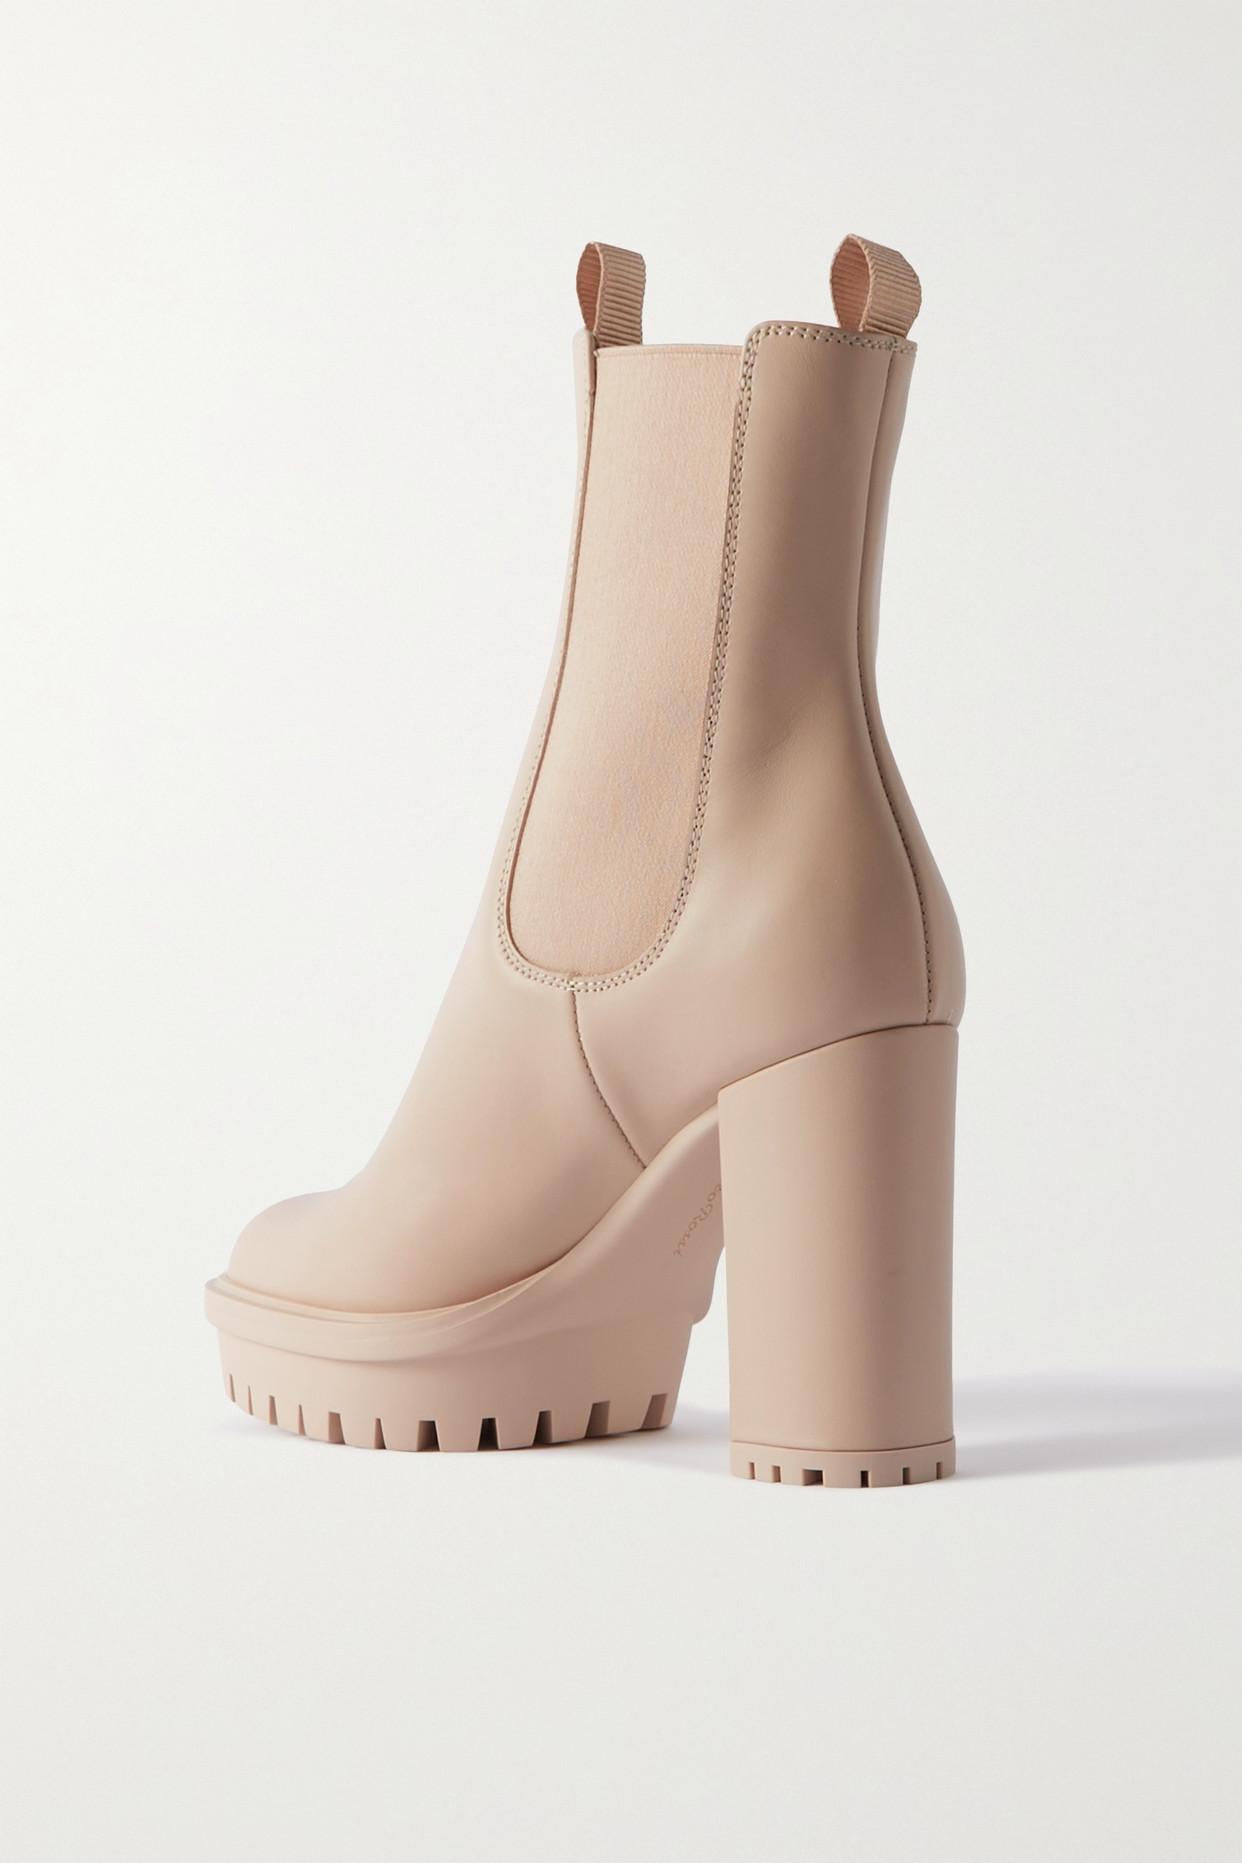 Gianvito Rossi Chester 70 Leather Platform Chelsea Boots in Natural | Lyst